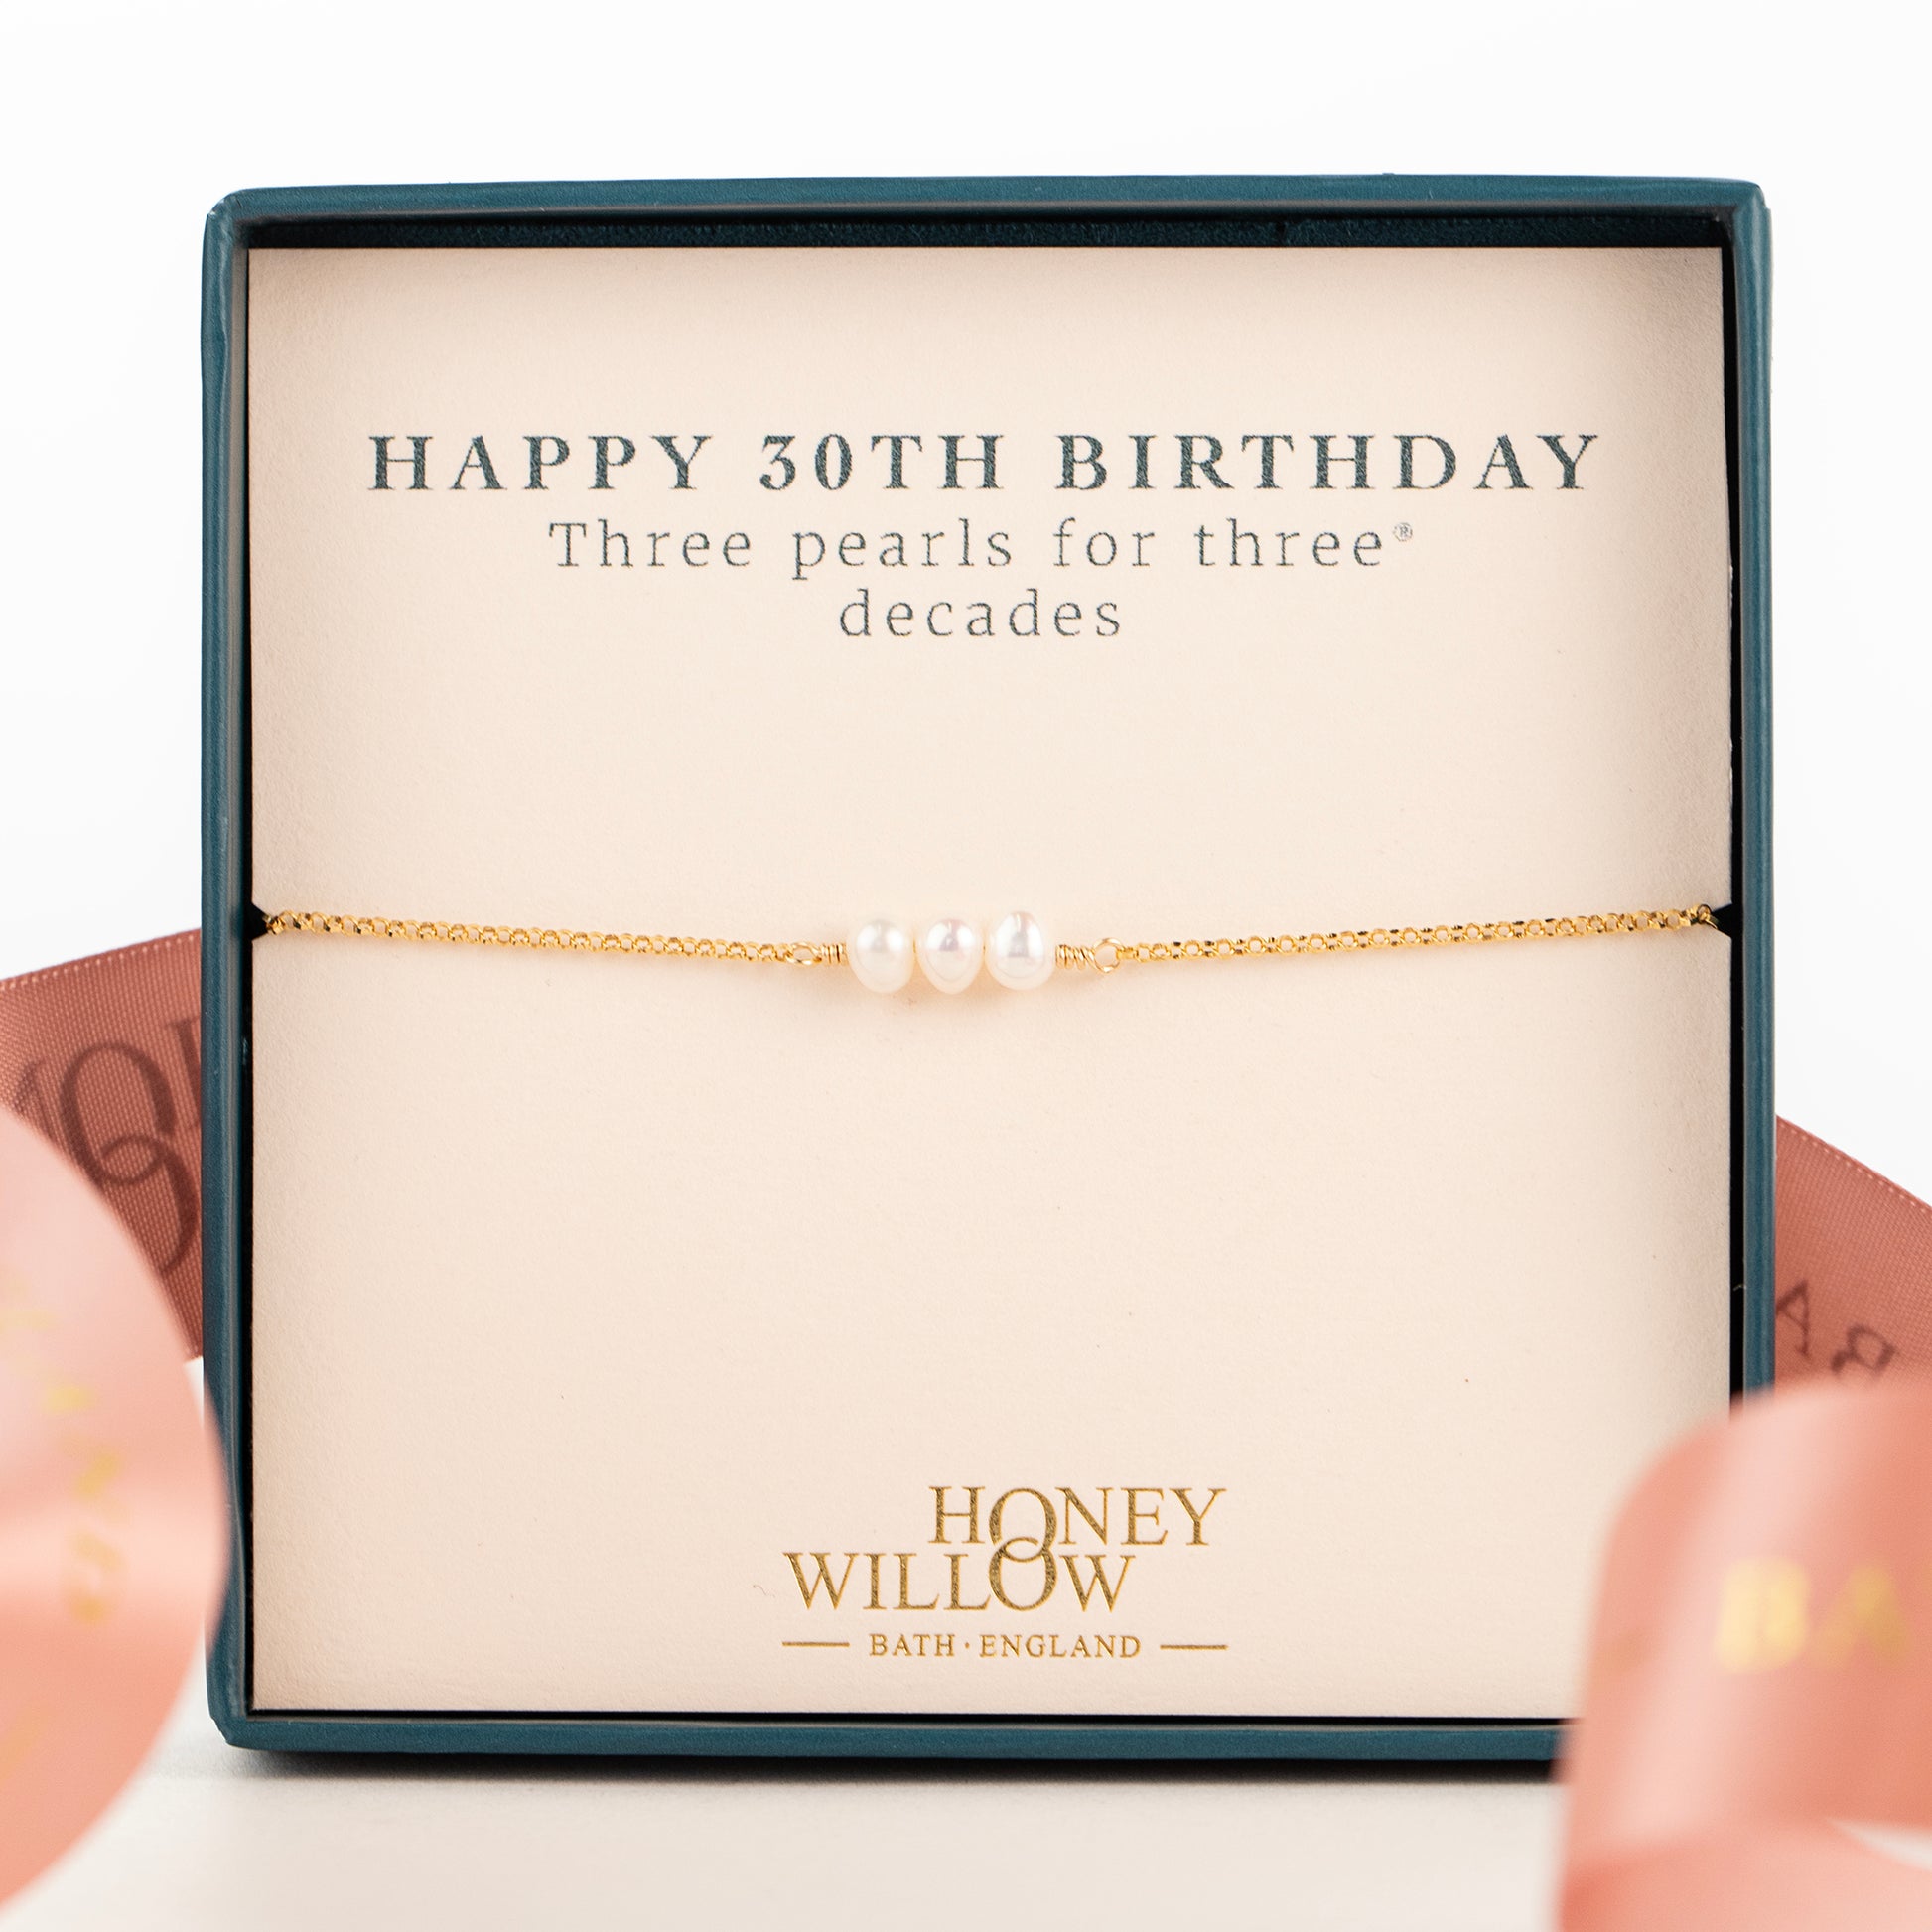 30th Birthday Bracelet - 3 Pearls for 3 Decades - Silver & Gold